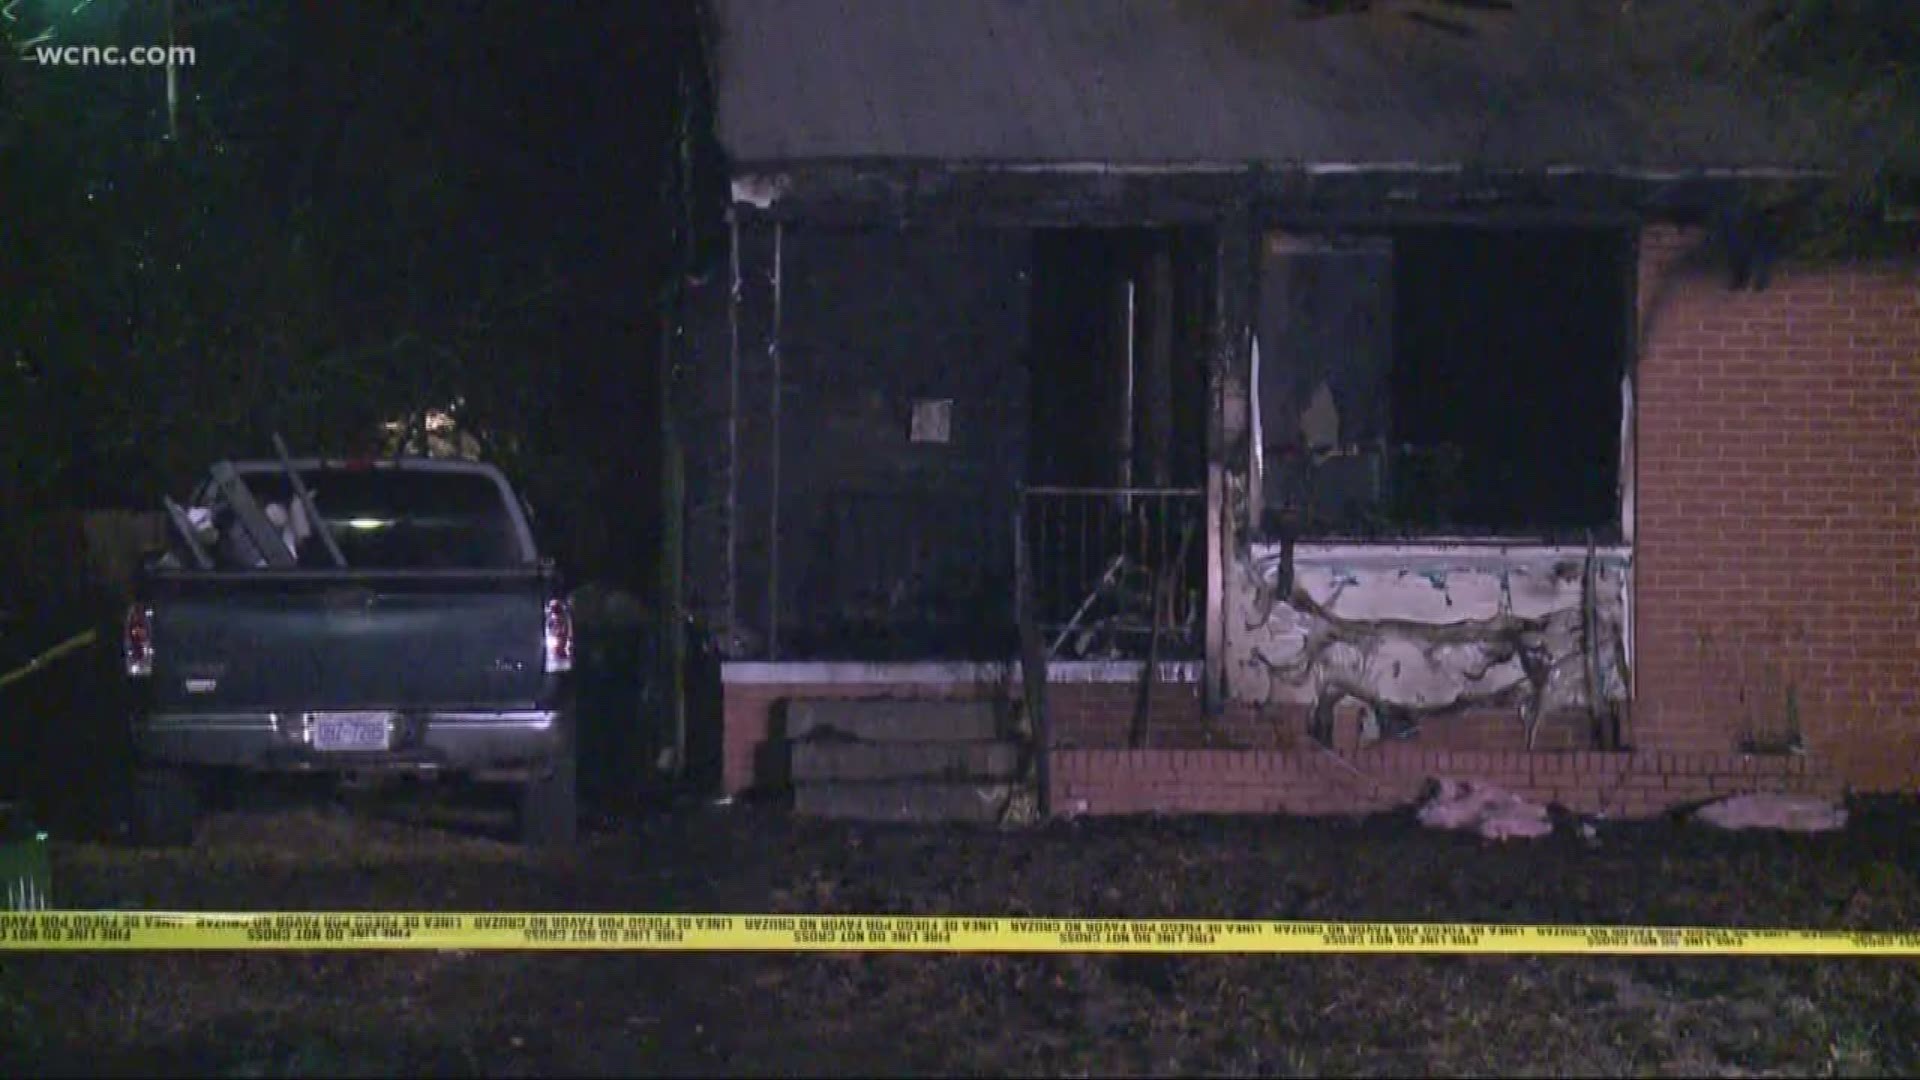 A mother and two children, ages 2 and 8, died in the hours and days after the fire on Academy St.